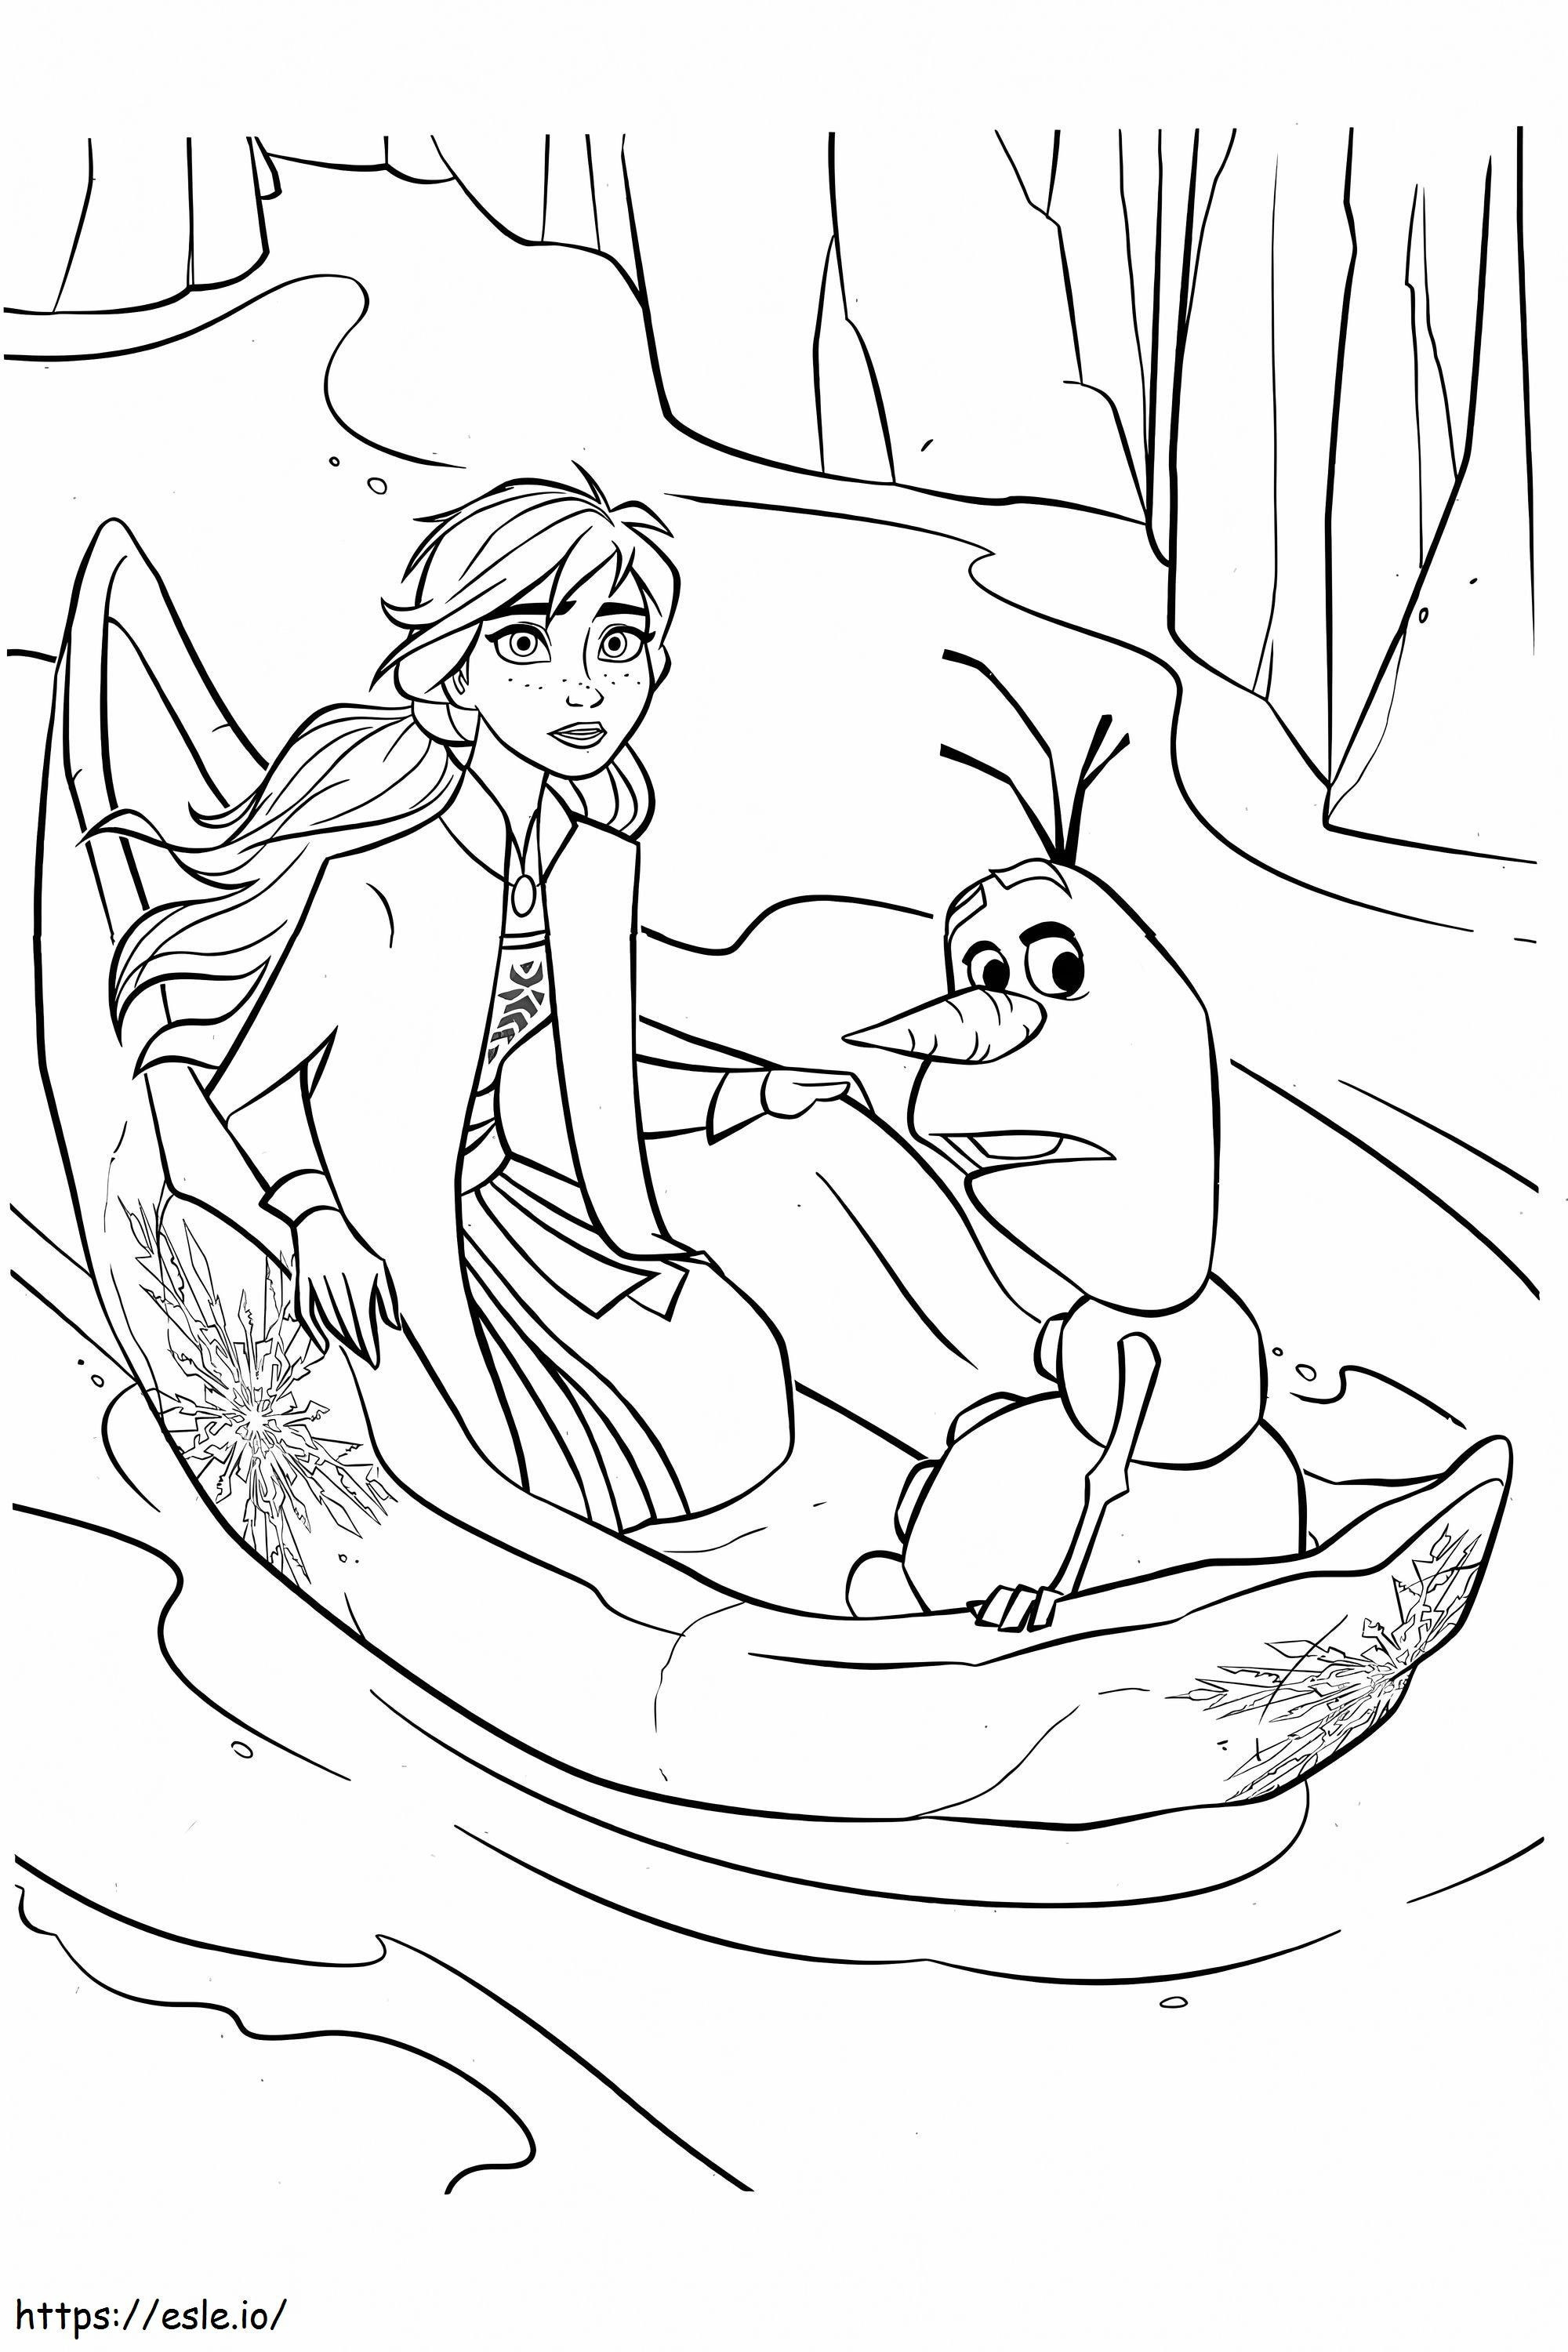 Frozen 2 Anna And Olaf coloring page